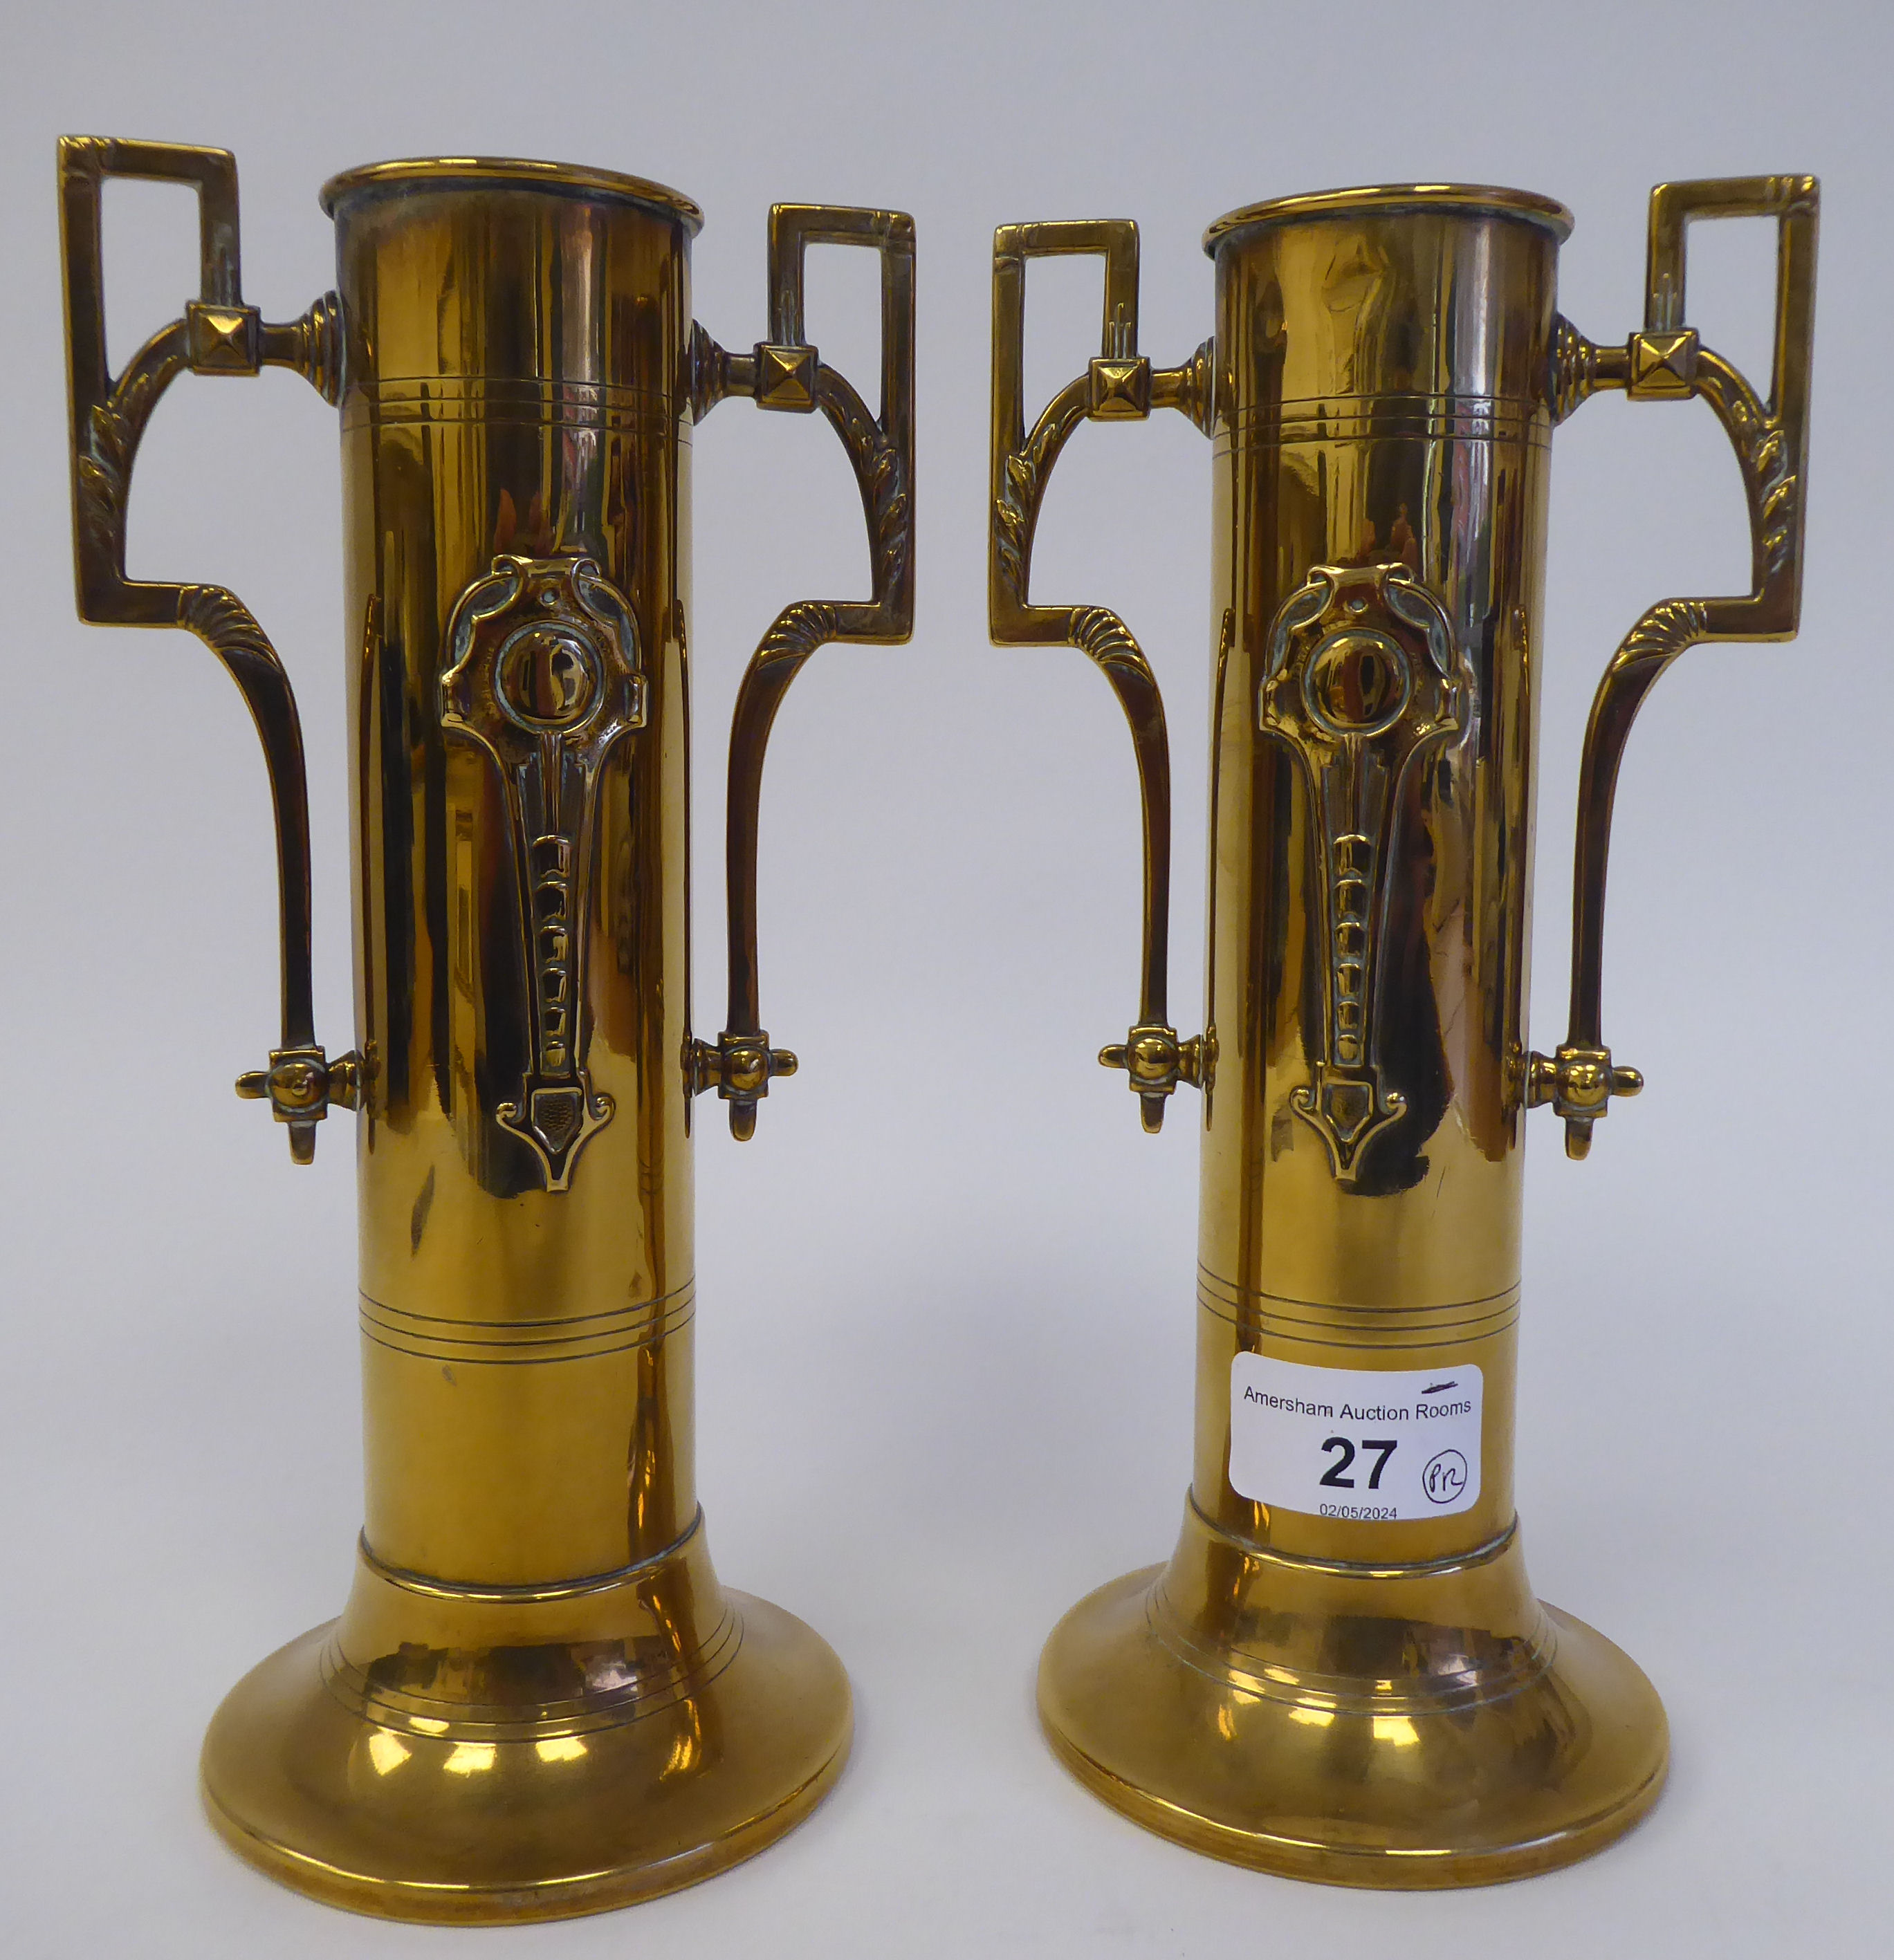 A pair of early 20thC Art Nouveau, Jugendstil style, brass cylindrical, twin handled spill vases